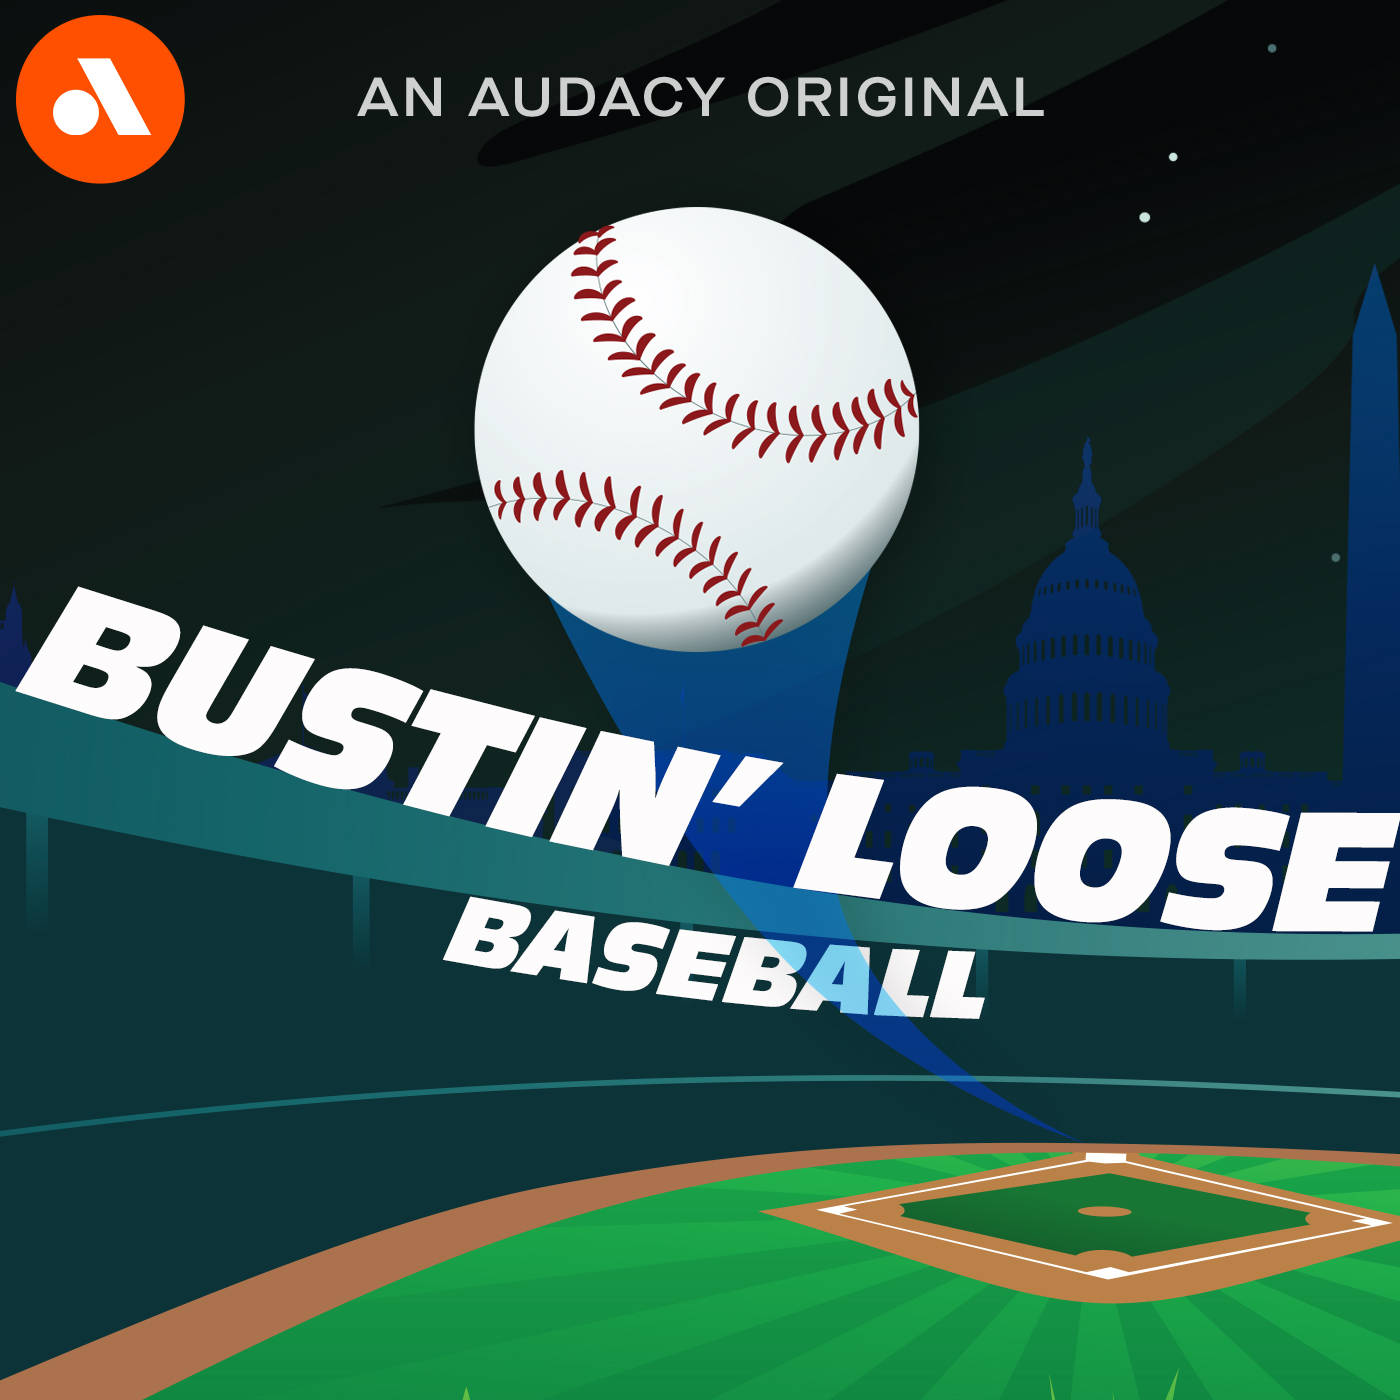 Welcome To The Show, Mitchell Parker | 'Bustin' Loose Baseball'